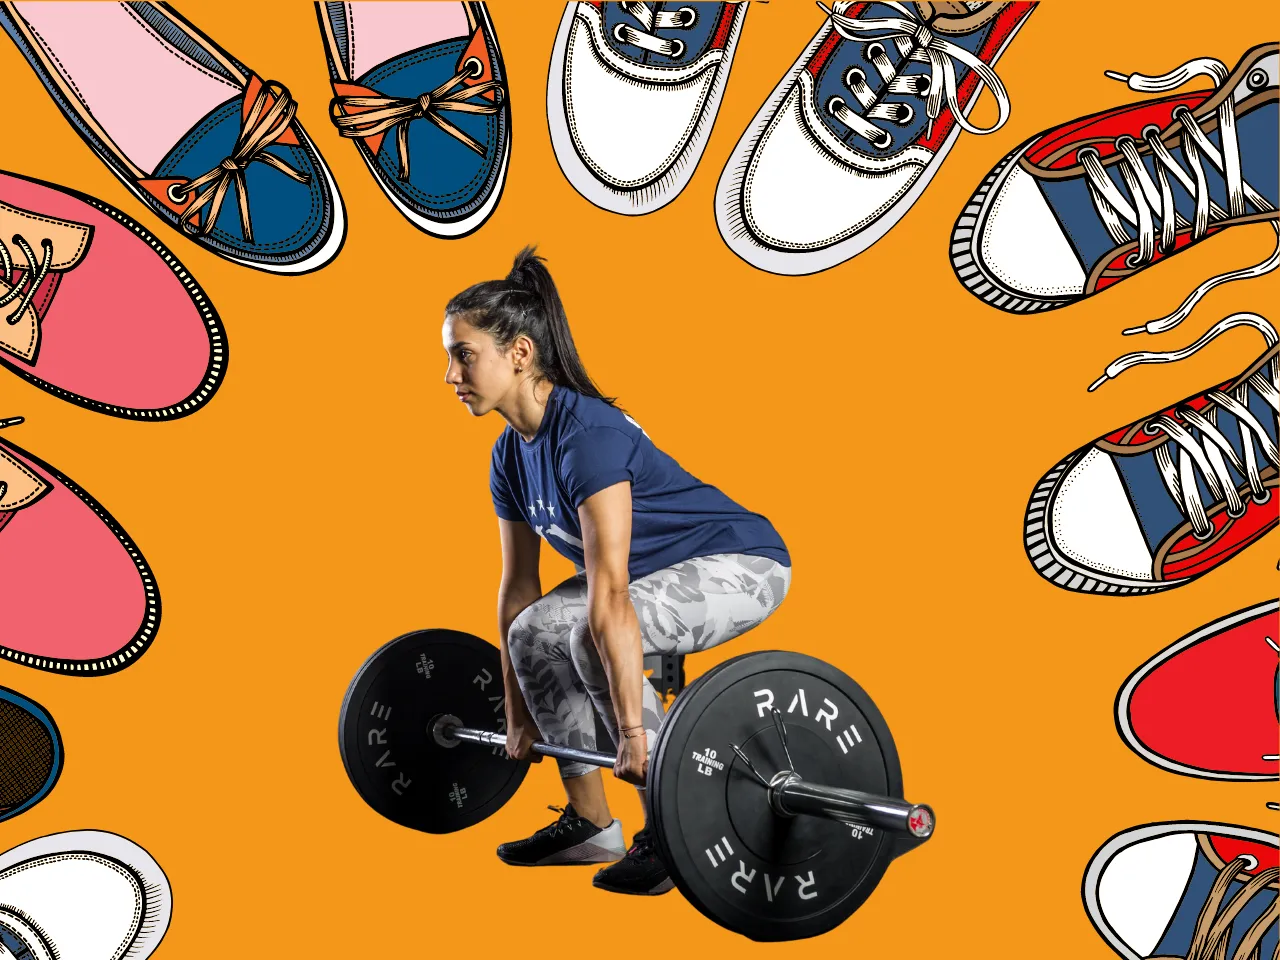 From Performance to Style: Indian Sportswear Startups are Redefining Athleisure